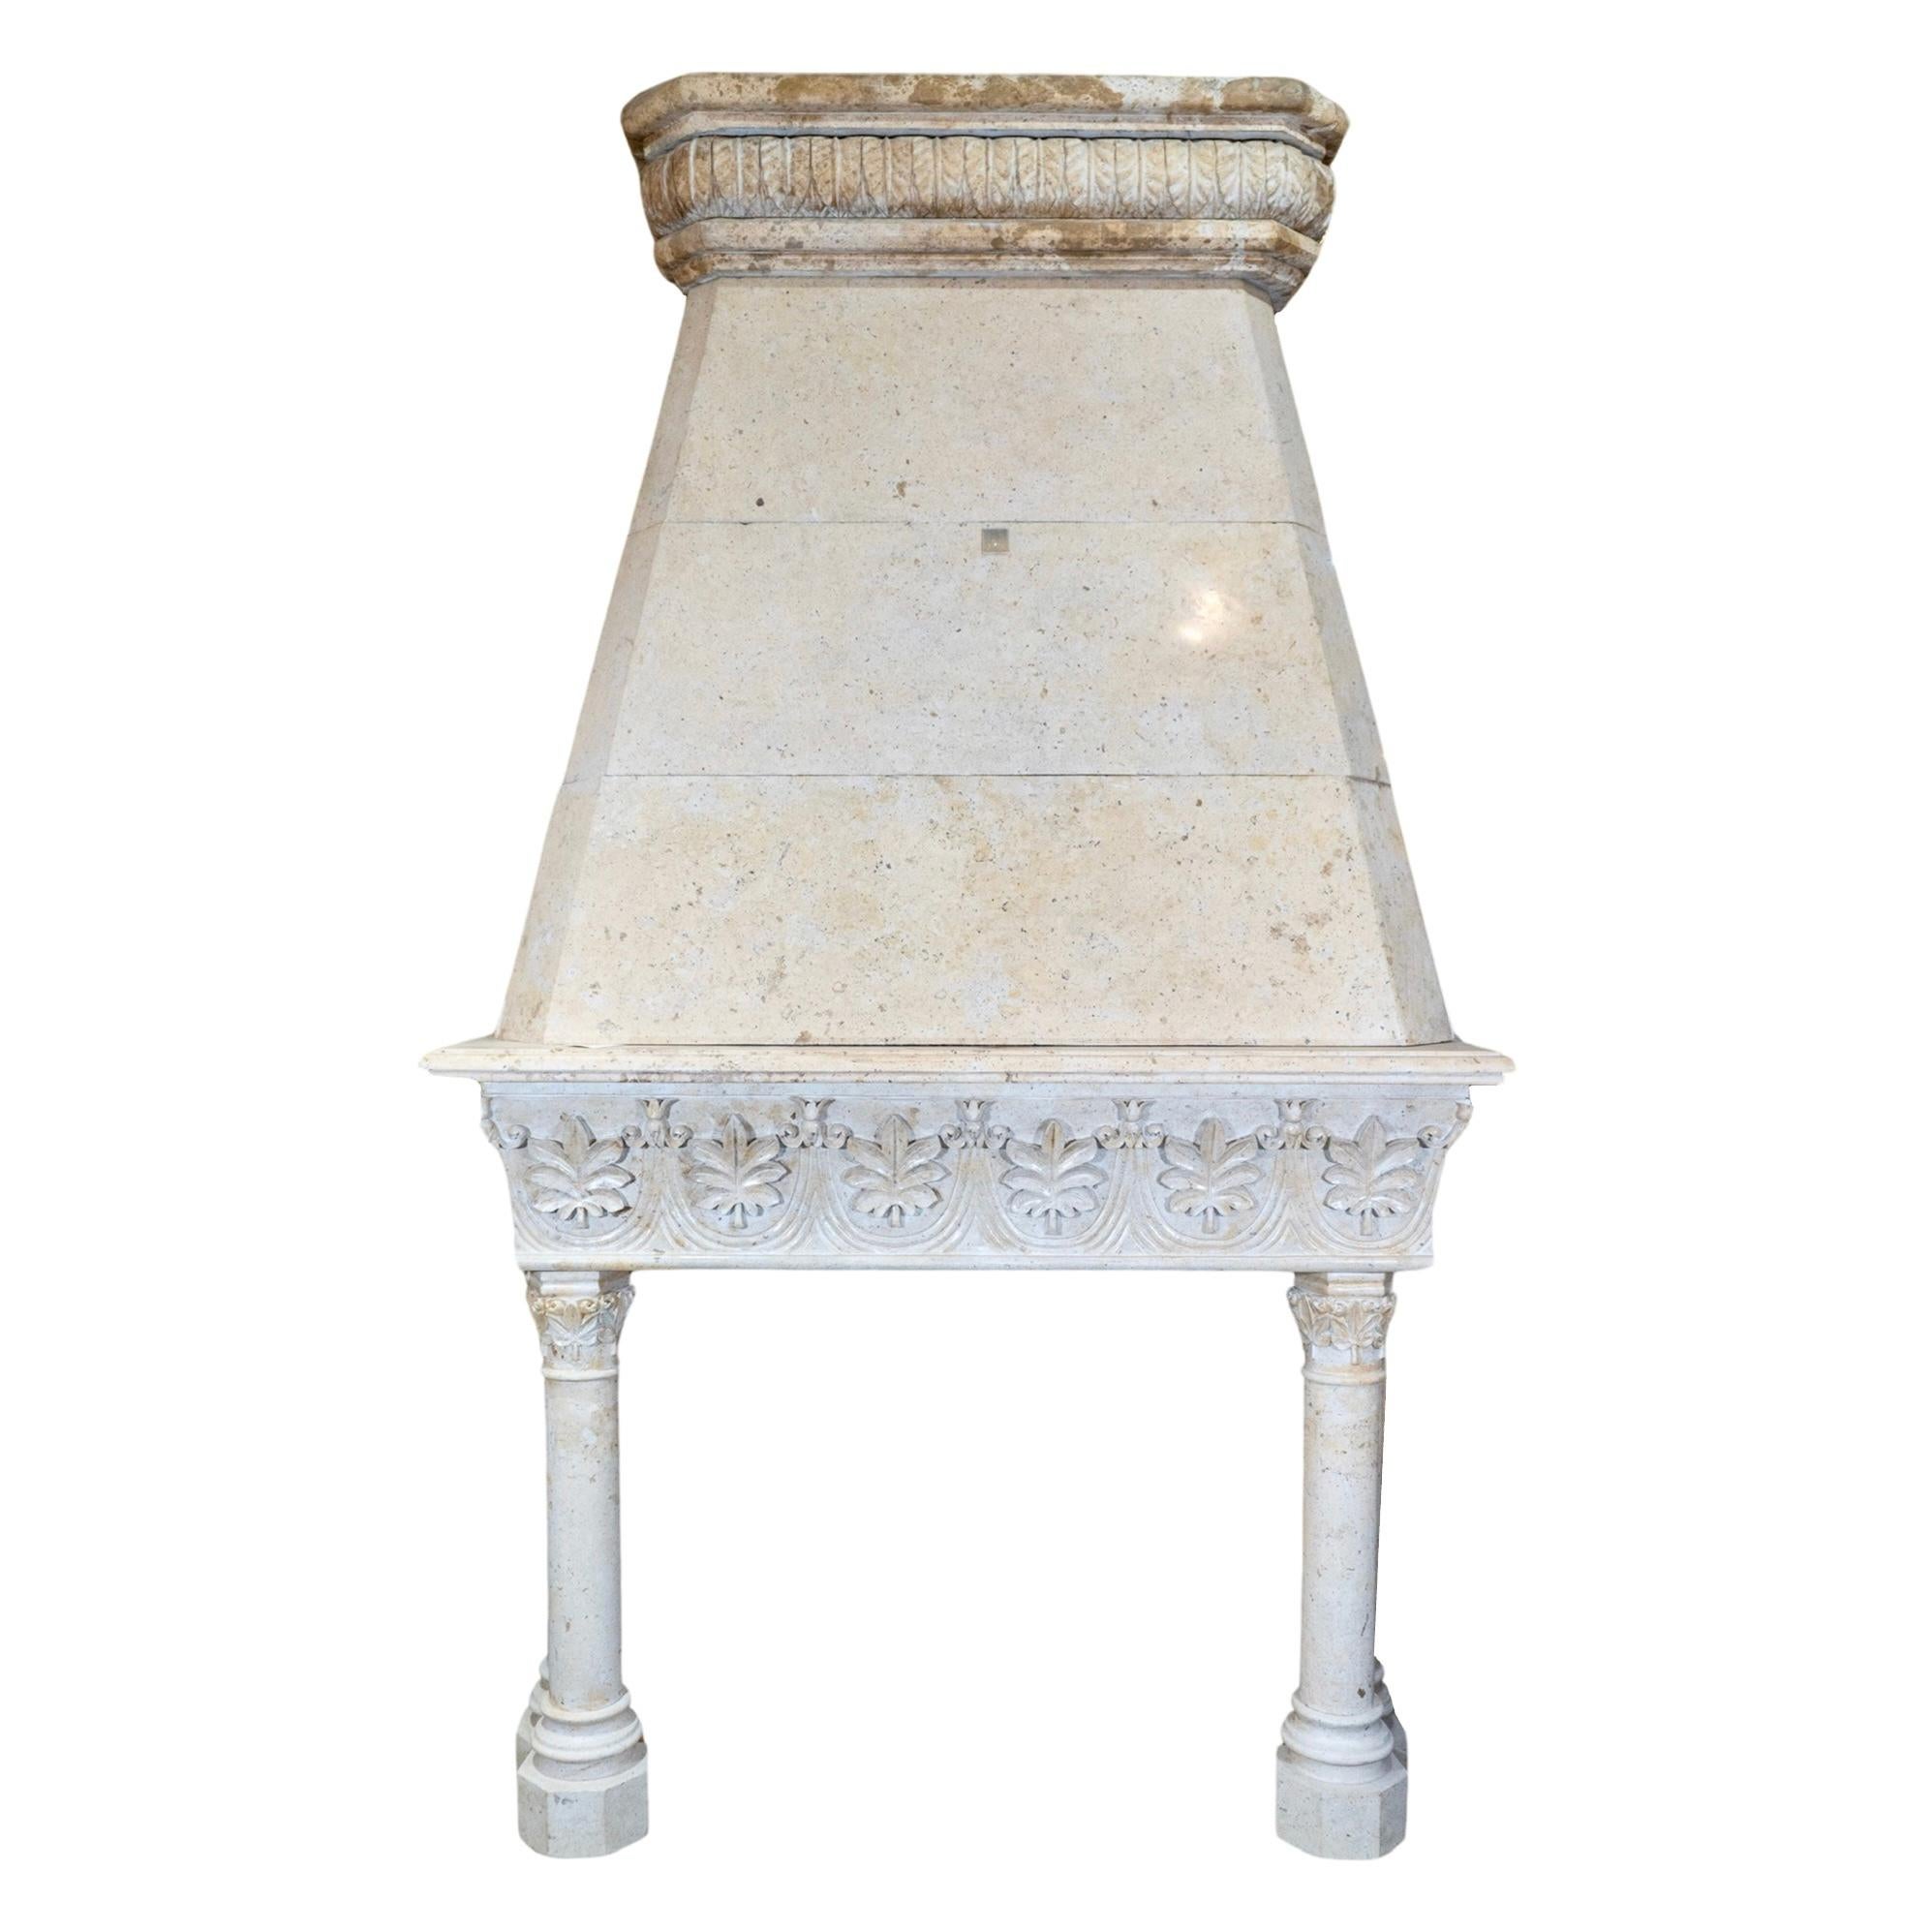 This Italian Polished Travertine Fireplace, made out of high-quality travertine from Italy, showcases intricate floral motifs that date back to the late 19th century. The polished finish adds a touch of elegance to any room, while the durable